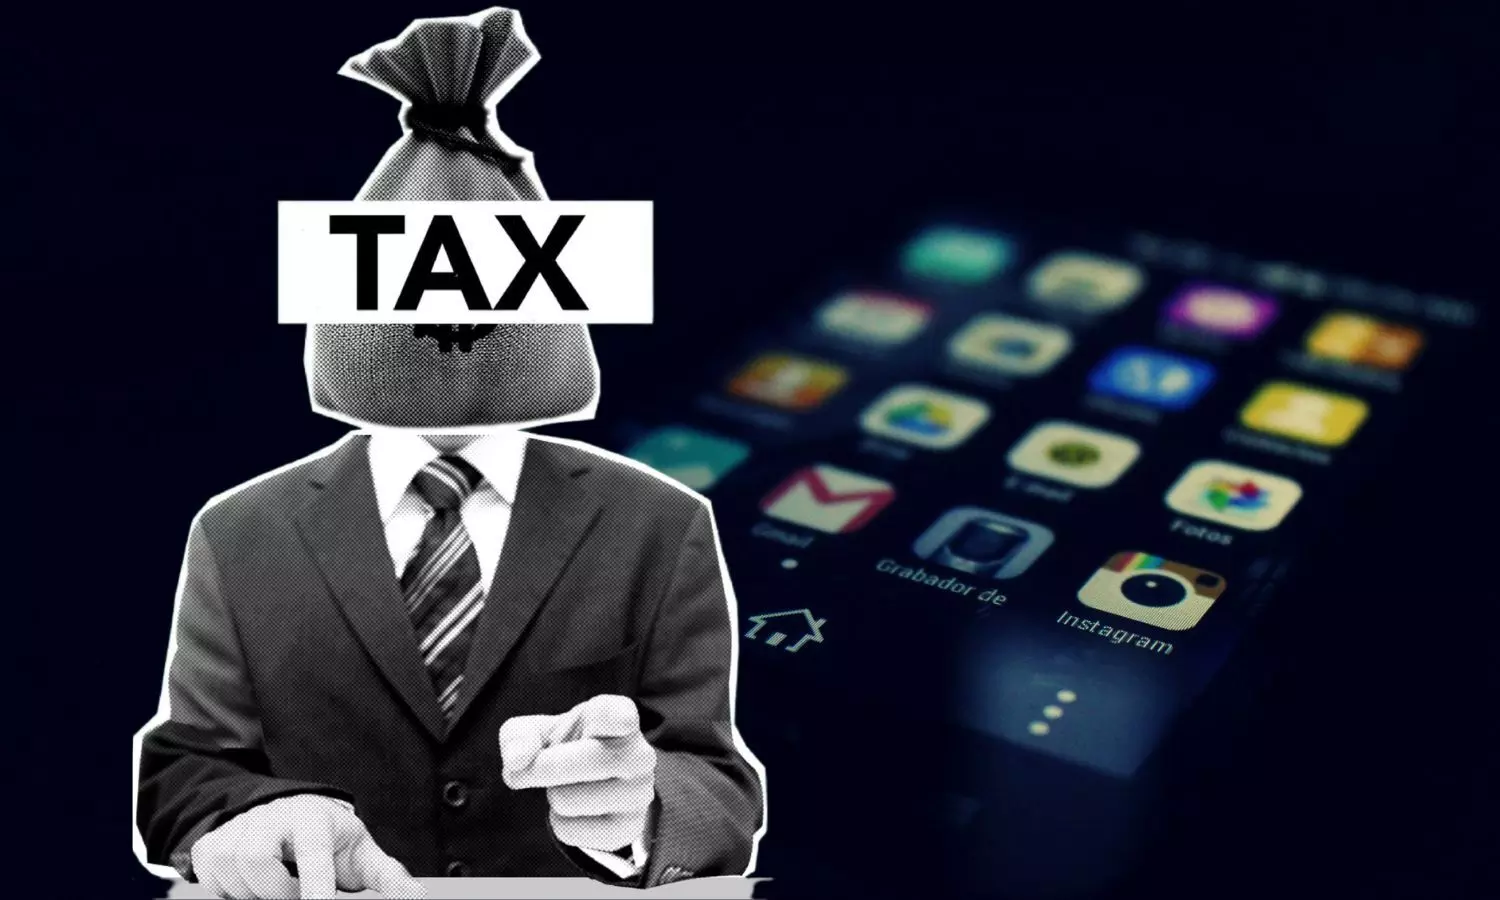 Tax and Smartphone